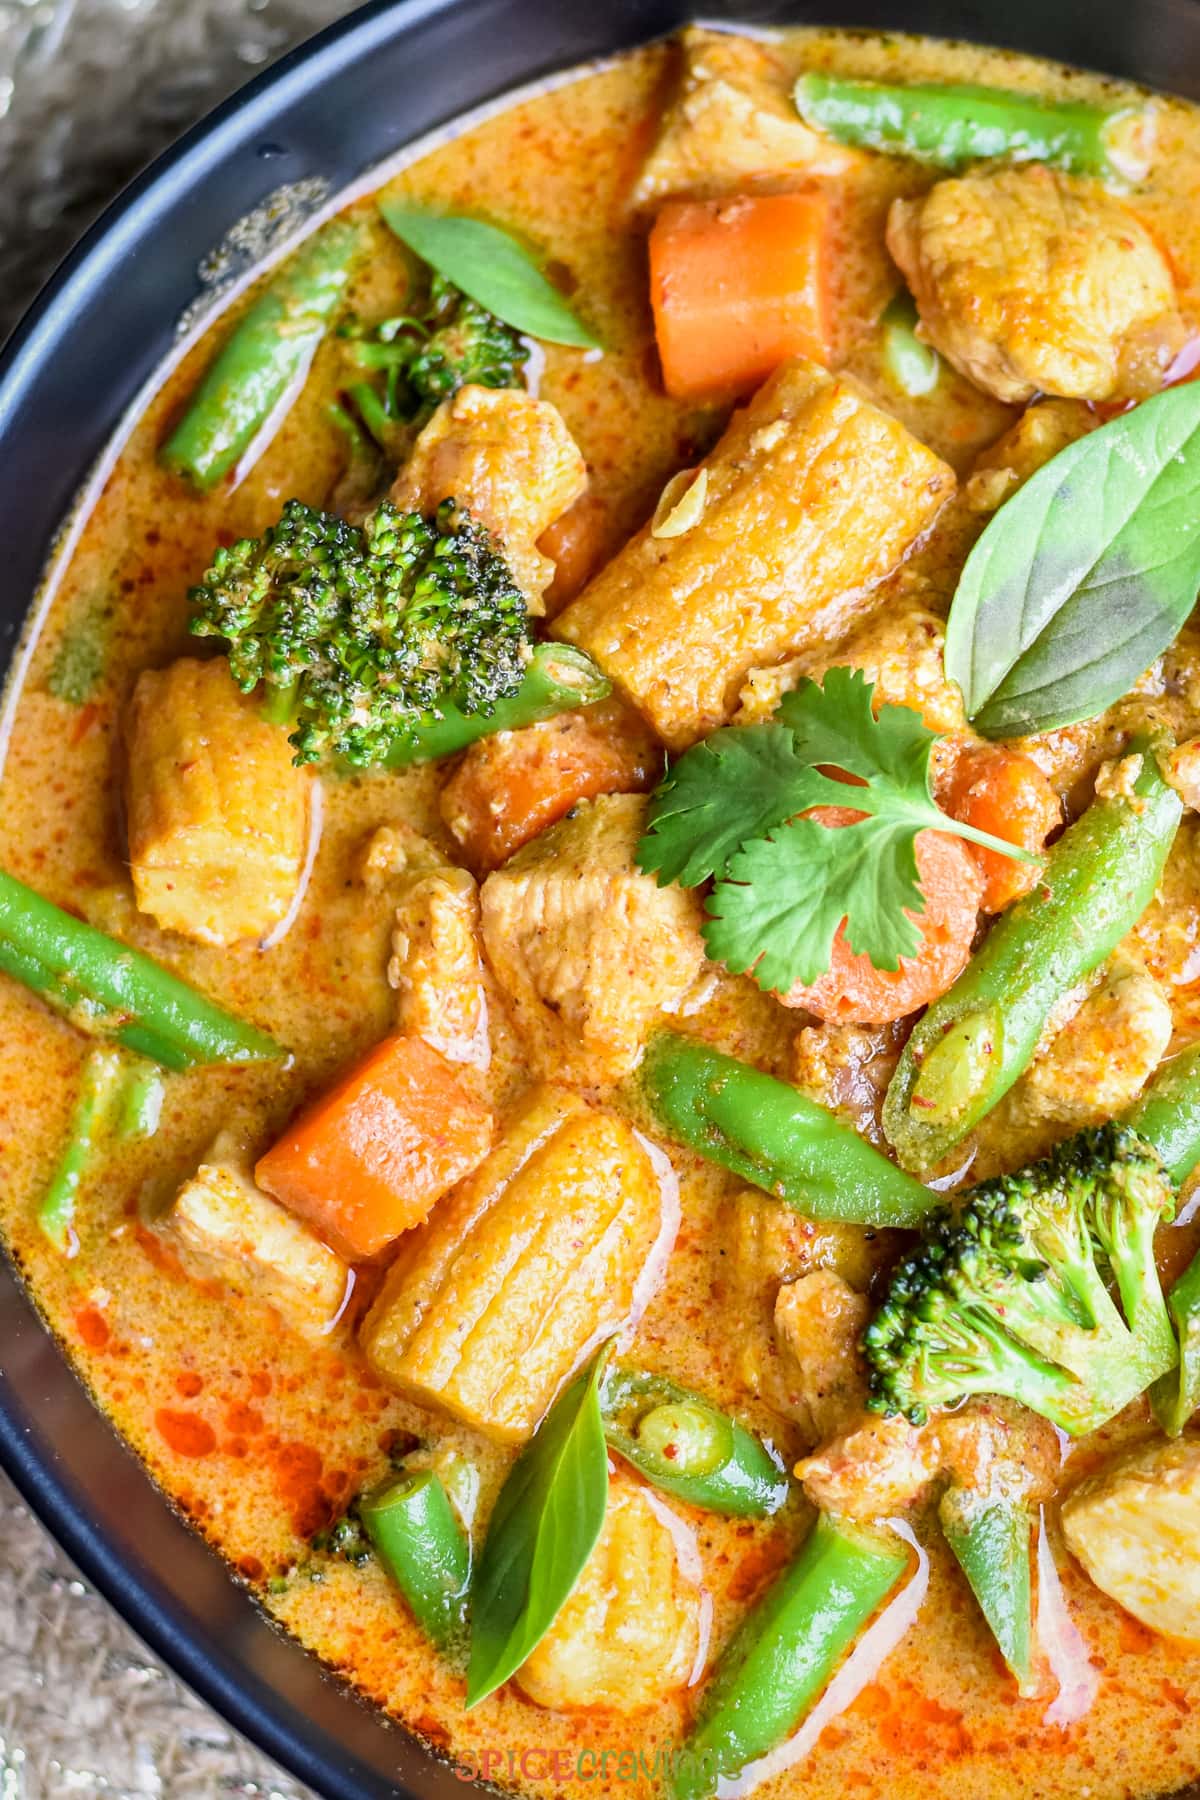 A bowl of thai Massaman Curry made with chicken and assorted vegetables including snow peas, carrots, broccoli and baby corn